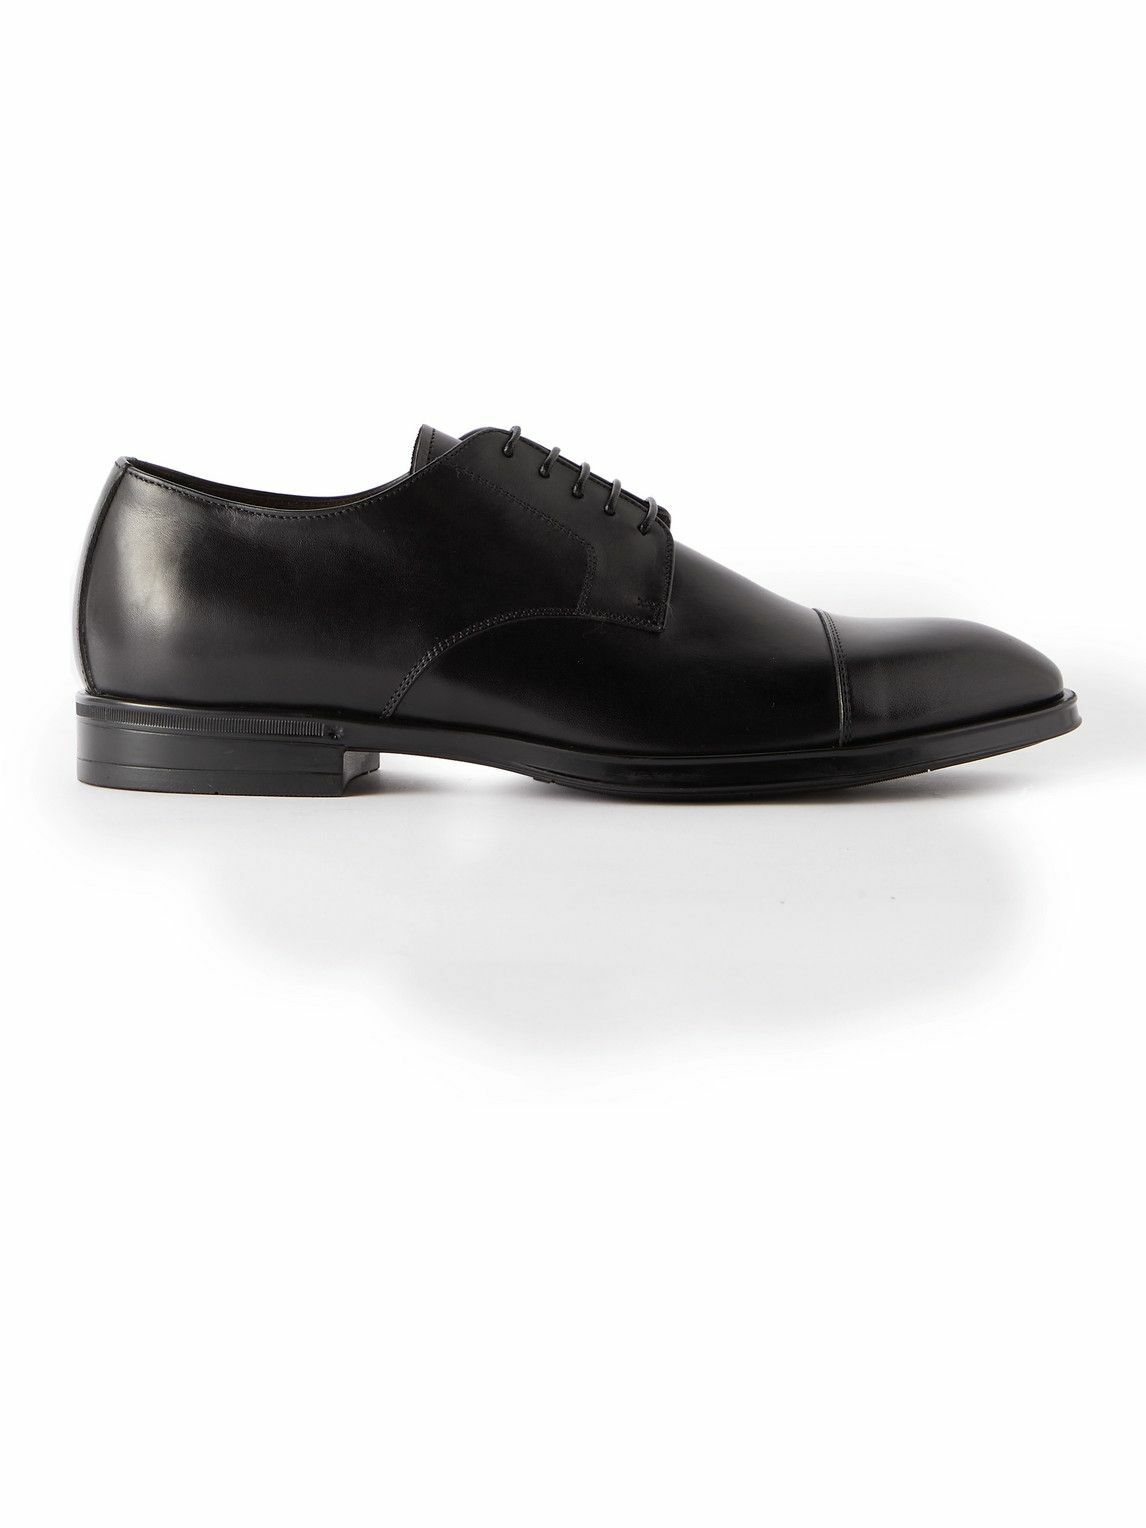 Canali - Leather Derby Shoes - Black Canali